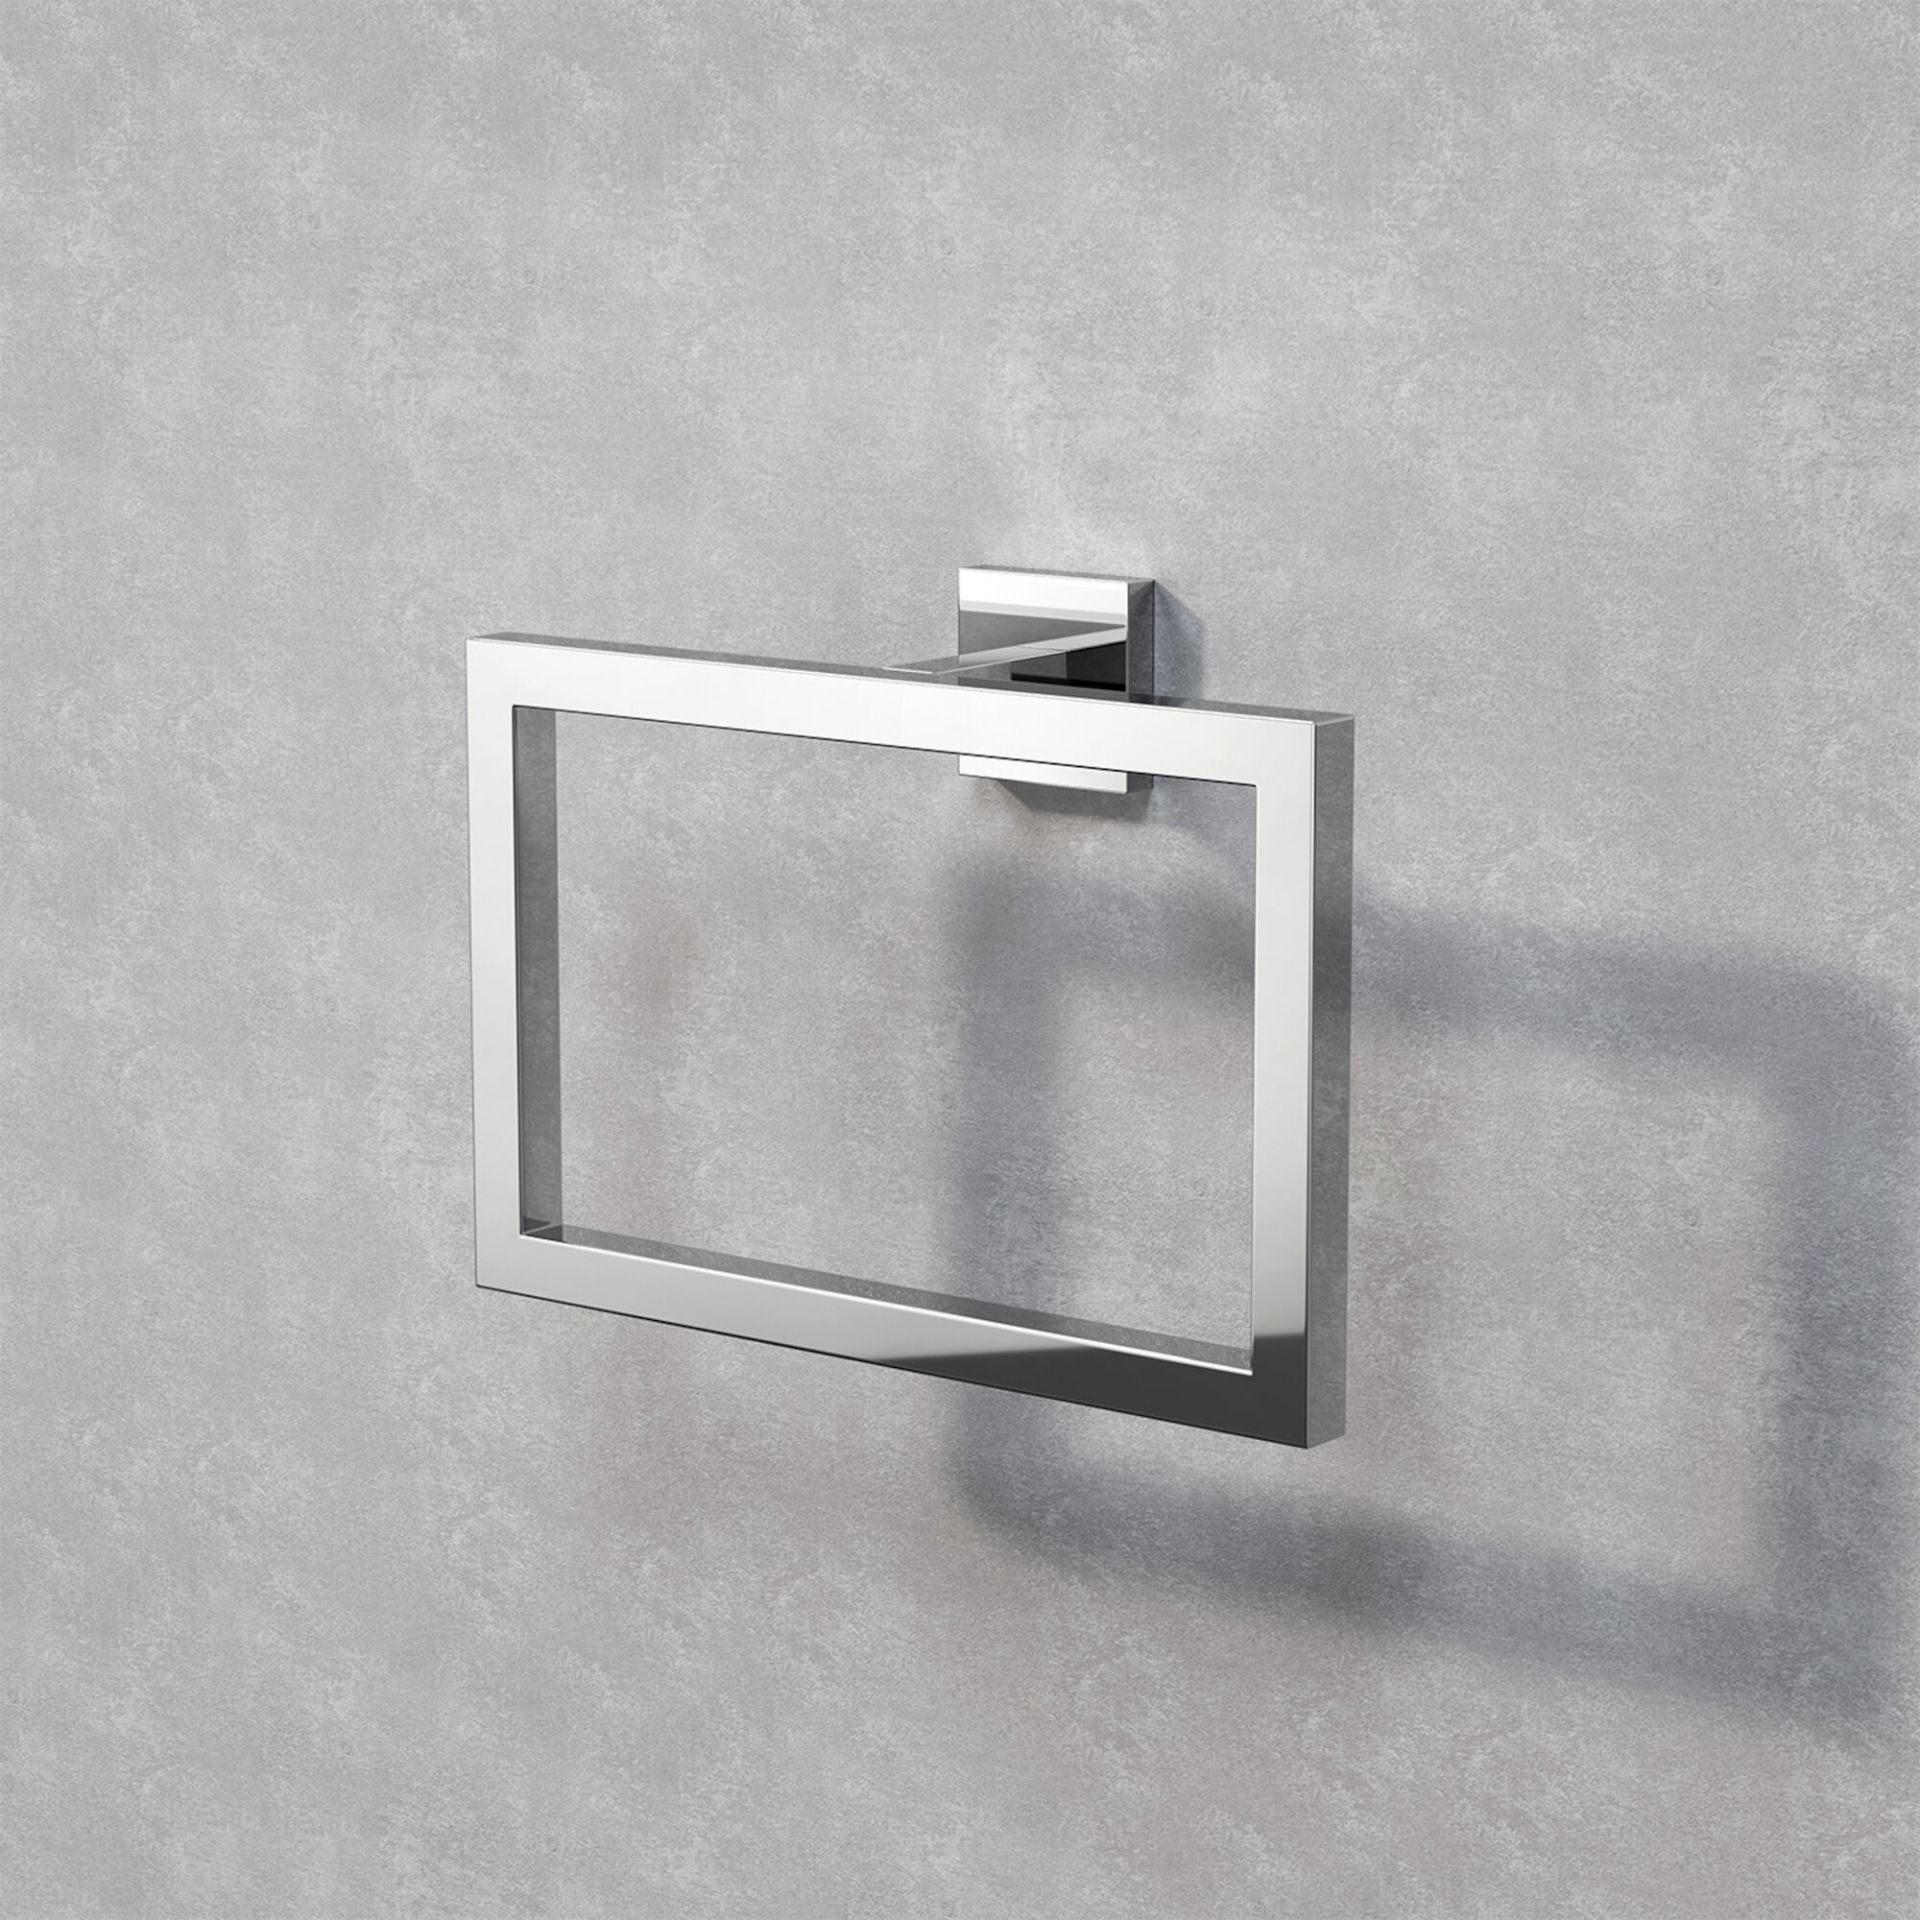 (QT1001) Jesmond Towel Ring Finishes your bathroom with a little extra functionality and style...